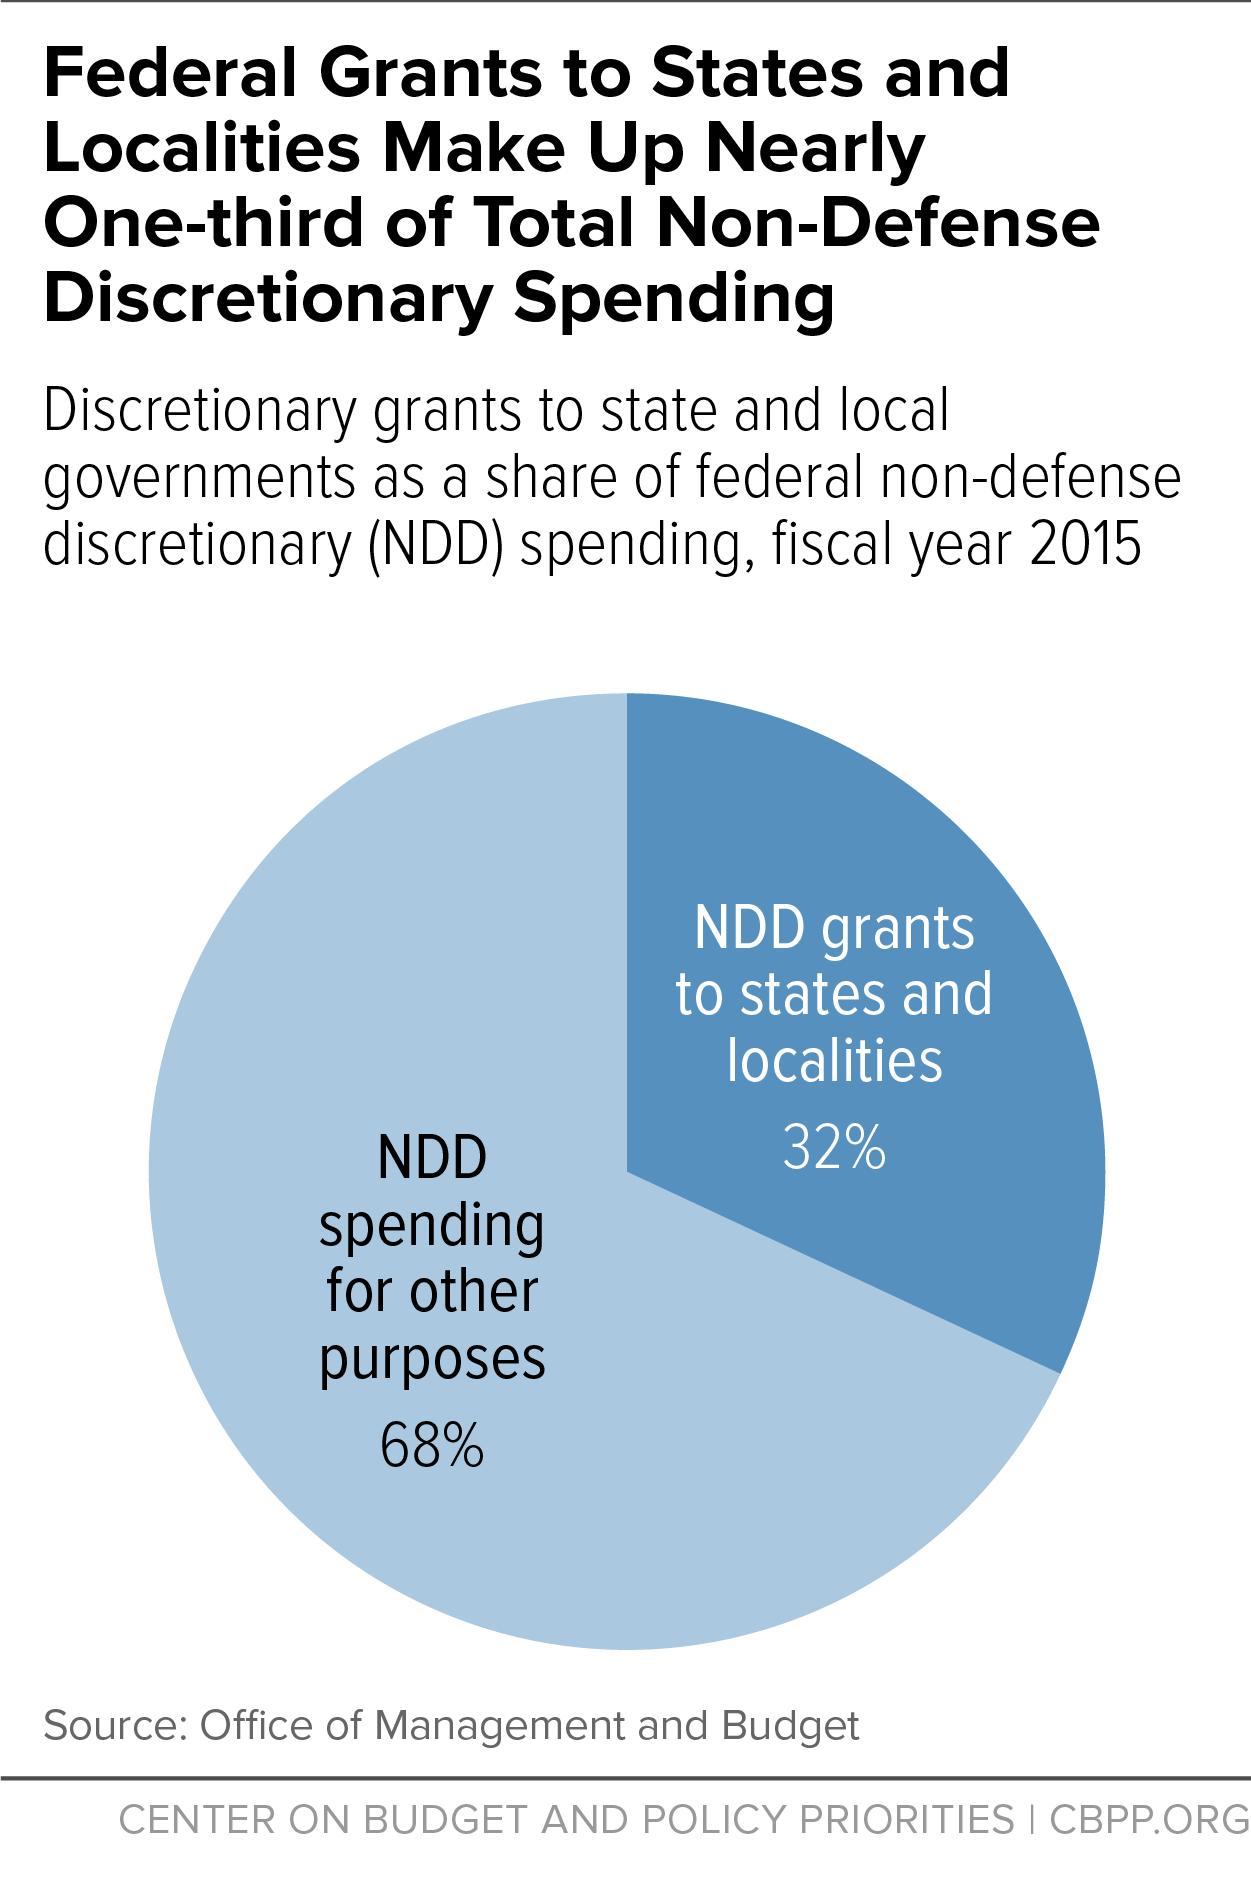 Federal Grants to States and Localities Make Up Nearly One-third of Total Non-Defense Discretionary Spending